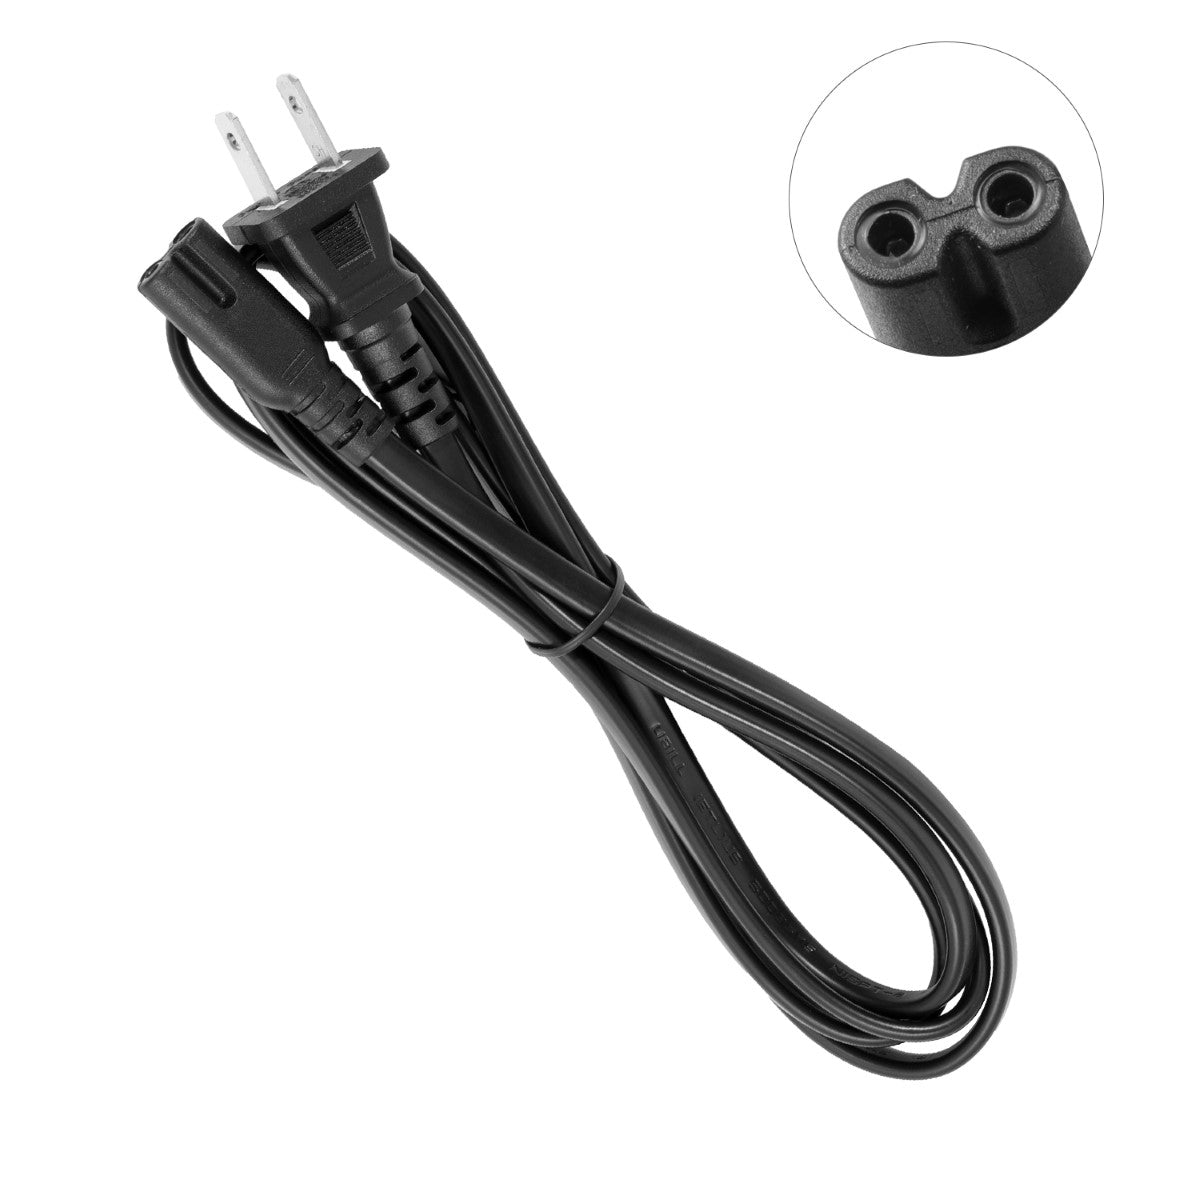 power cable hp printer